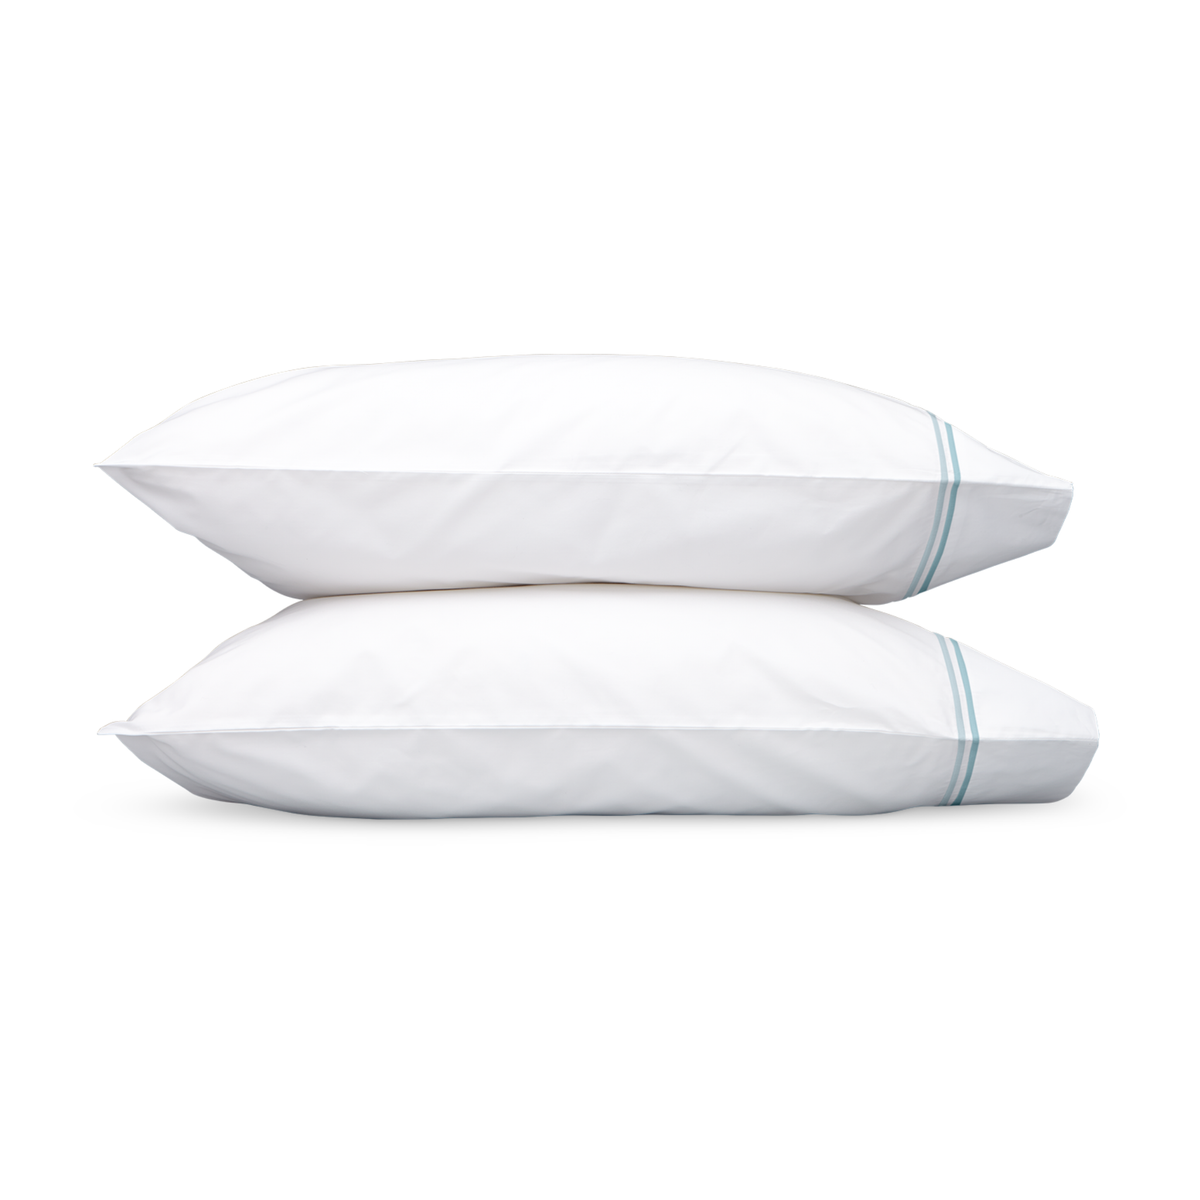 Pair of Pillowcases of Matouk Essex Bedding Collection in Pool Color